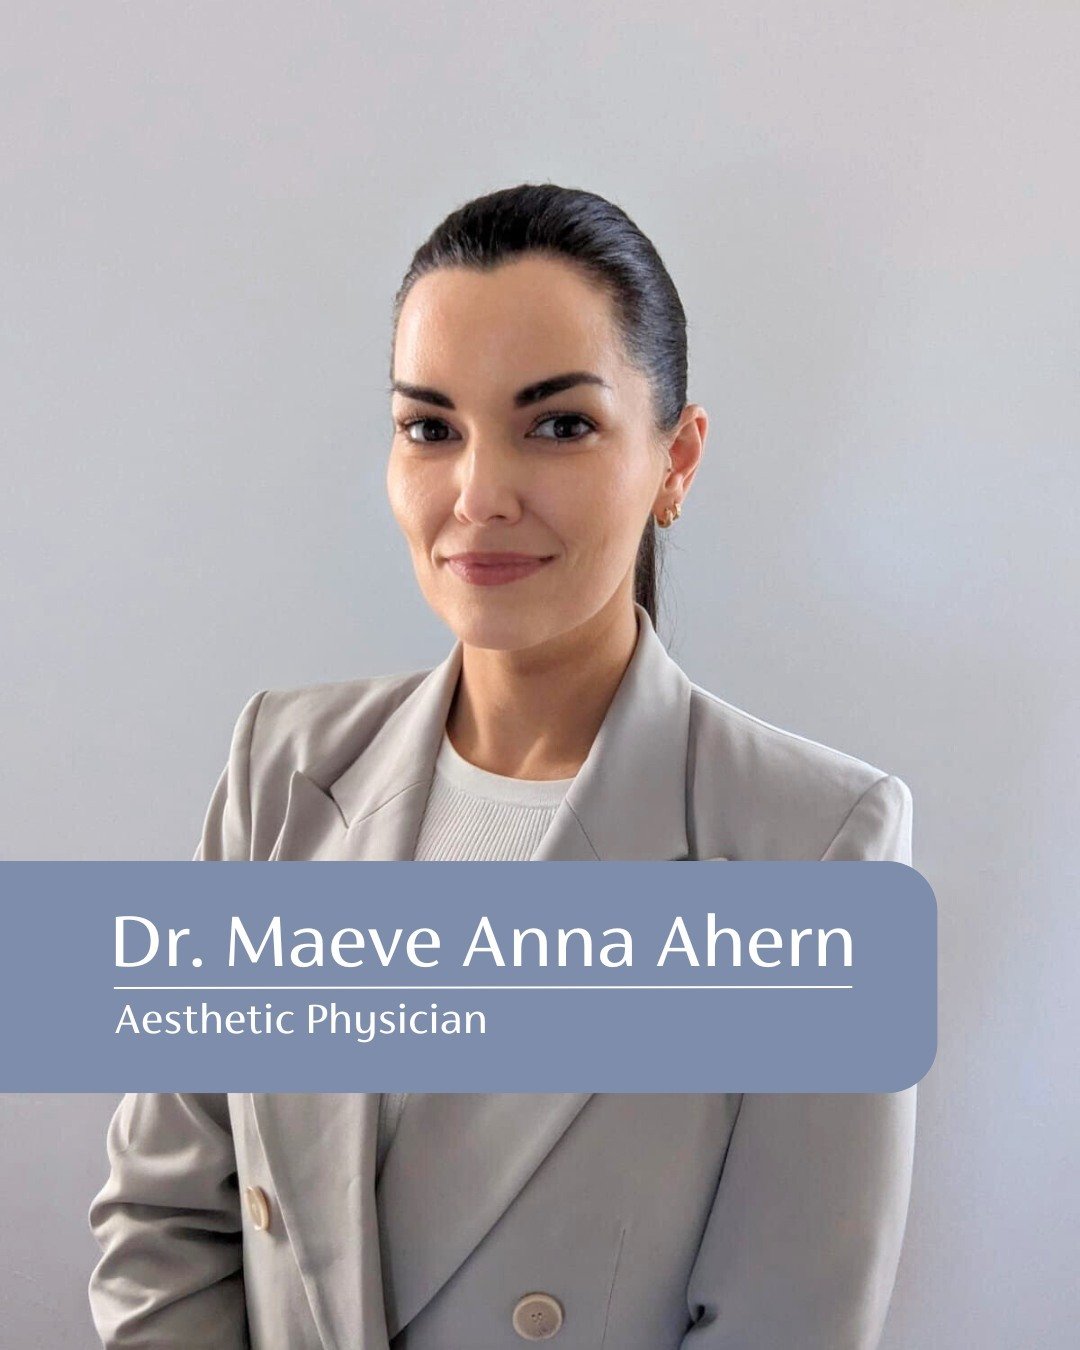 Meet the Team: 
Dr. Maeve Anna Ahern

Aesthetic Physician

Dr. Maeve is a highly skilled medical doctor specialising in Aesthetic Medicine. With six years of hospital-based clinical medicine under her belt, she has spent the last five years becoming 